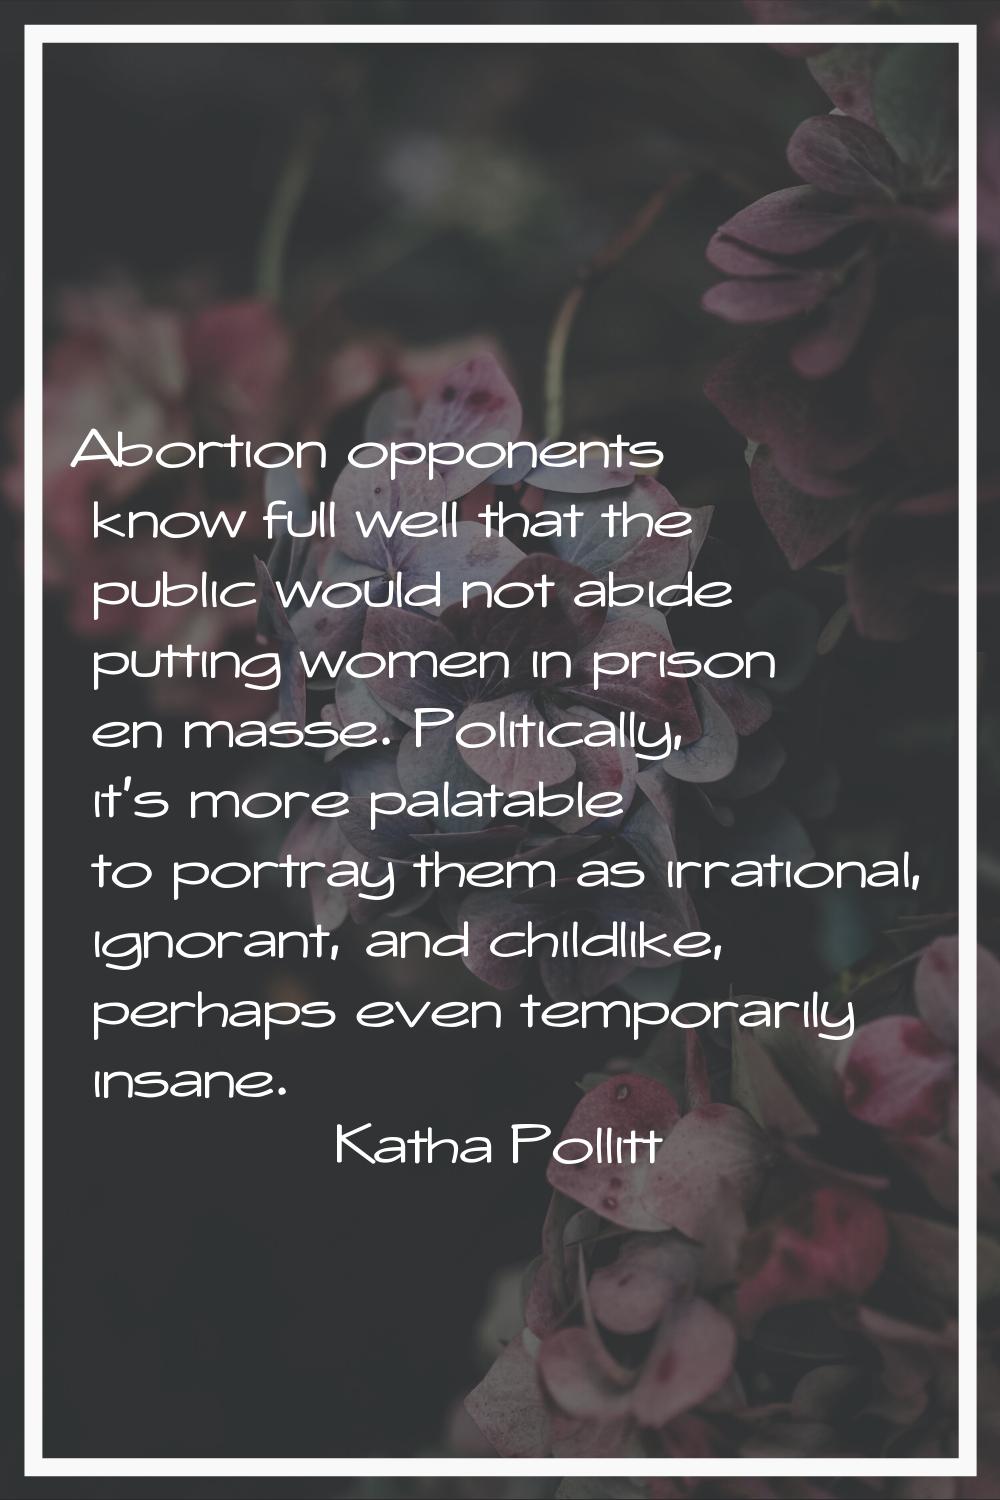 Abortion opponents know full well that the public would not abide putting women in prison en masse.